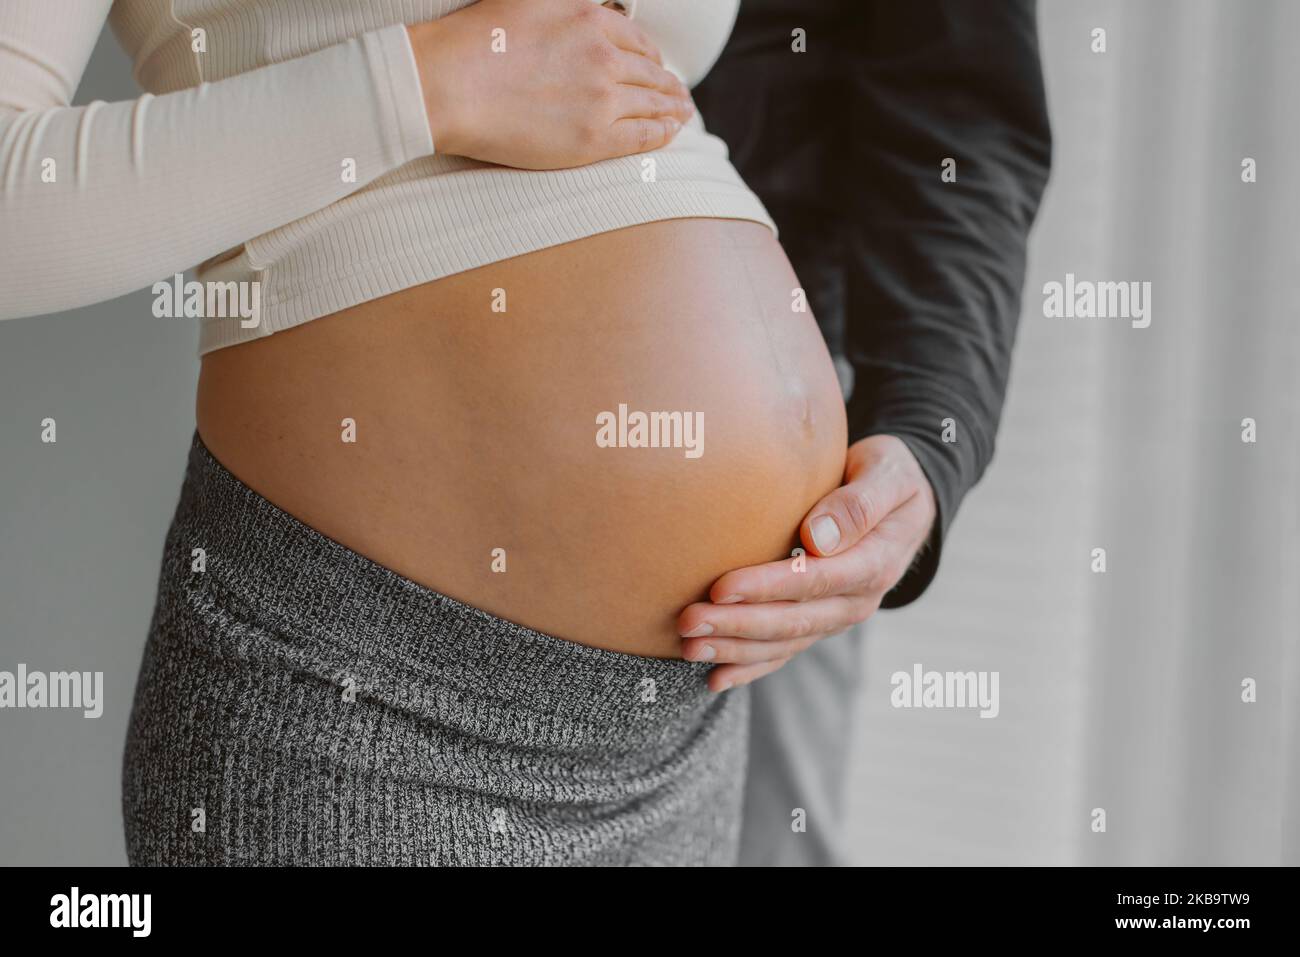 Couple expecting child baby bump man caressing pregnant woman stomach during pregnancy. Maternity shoot Stock Photo